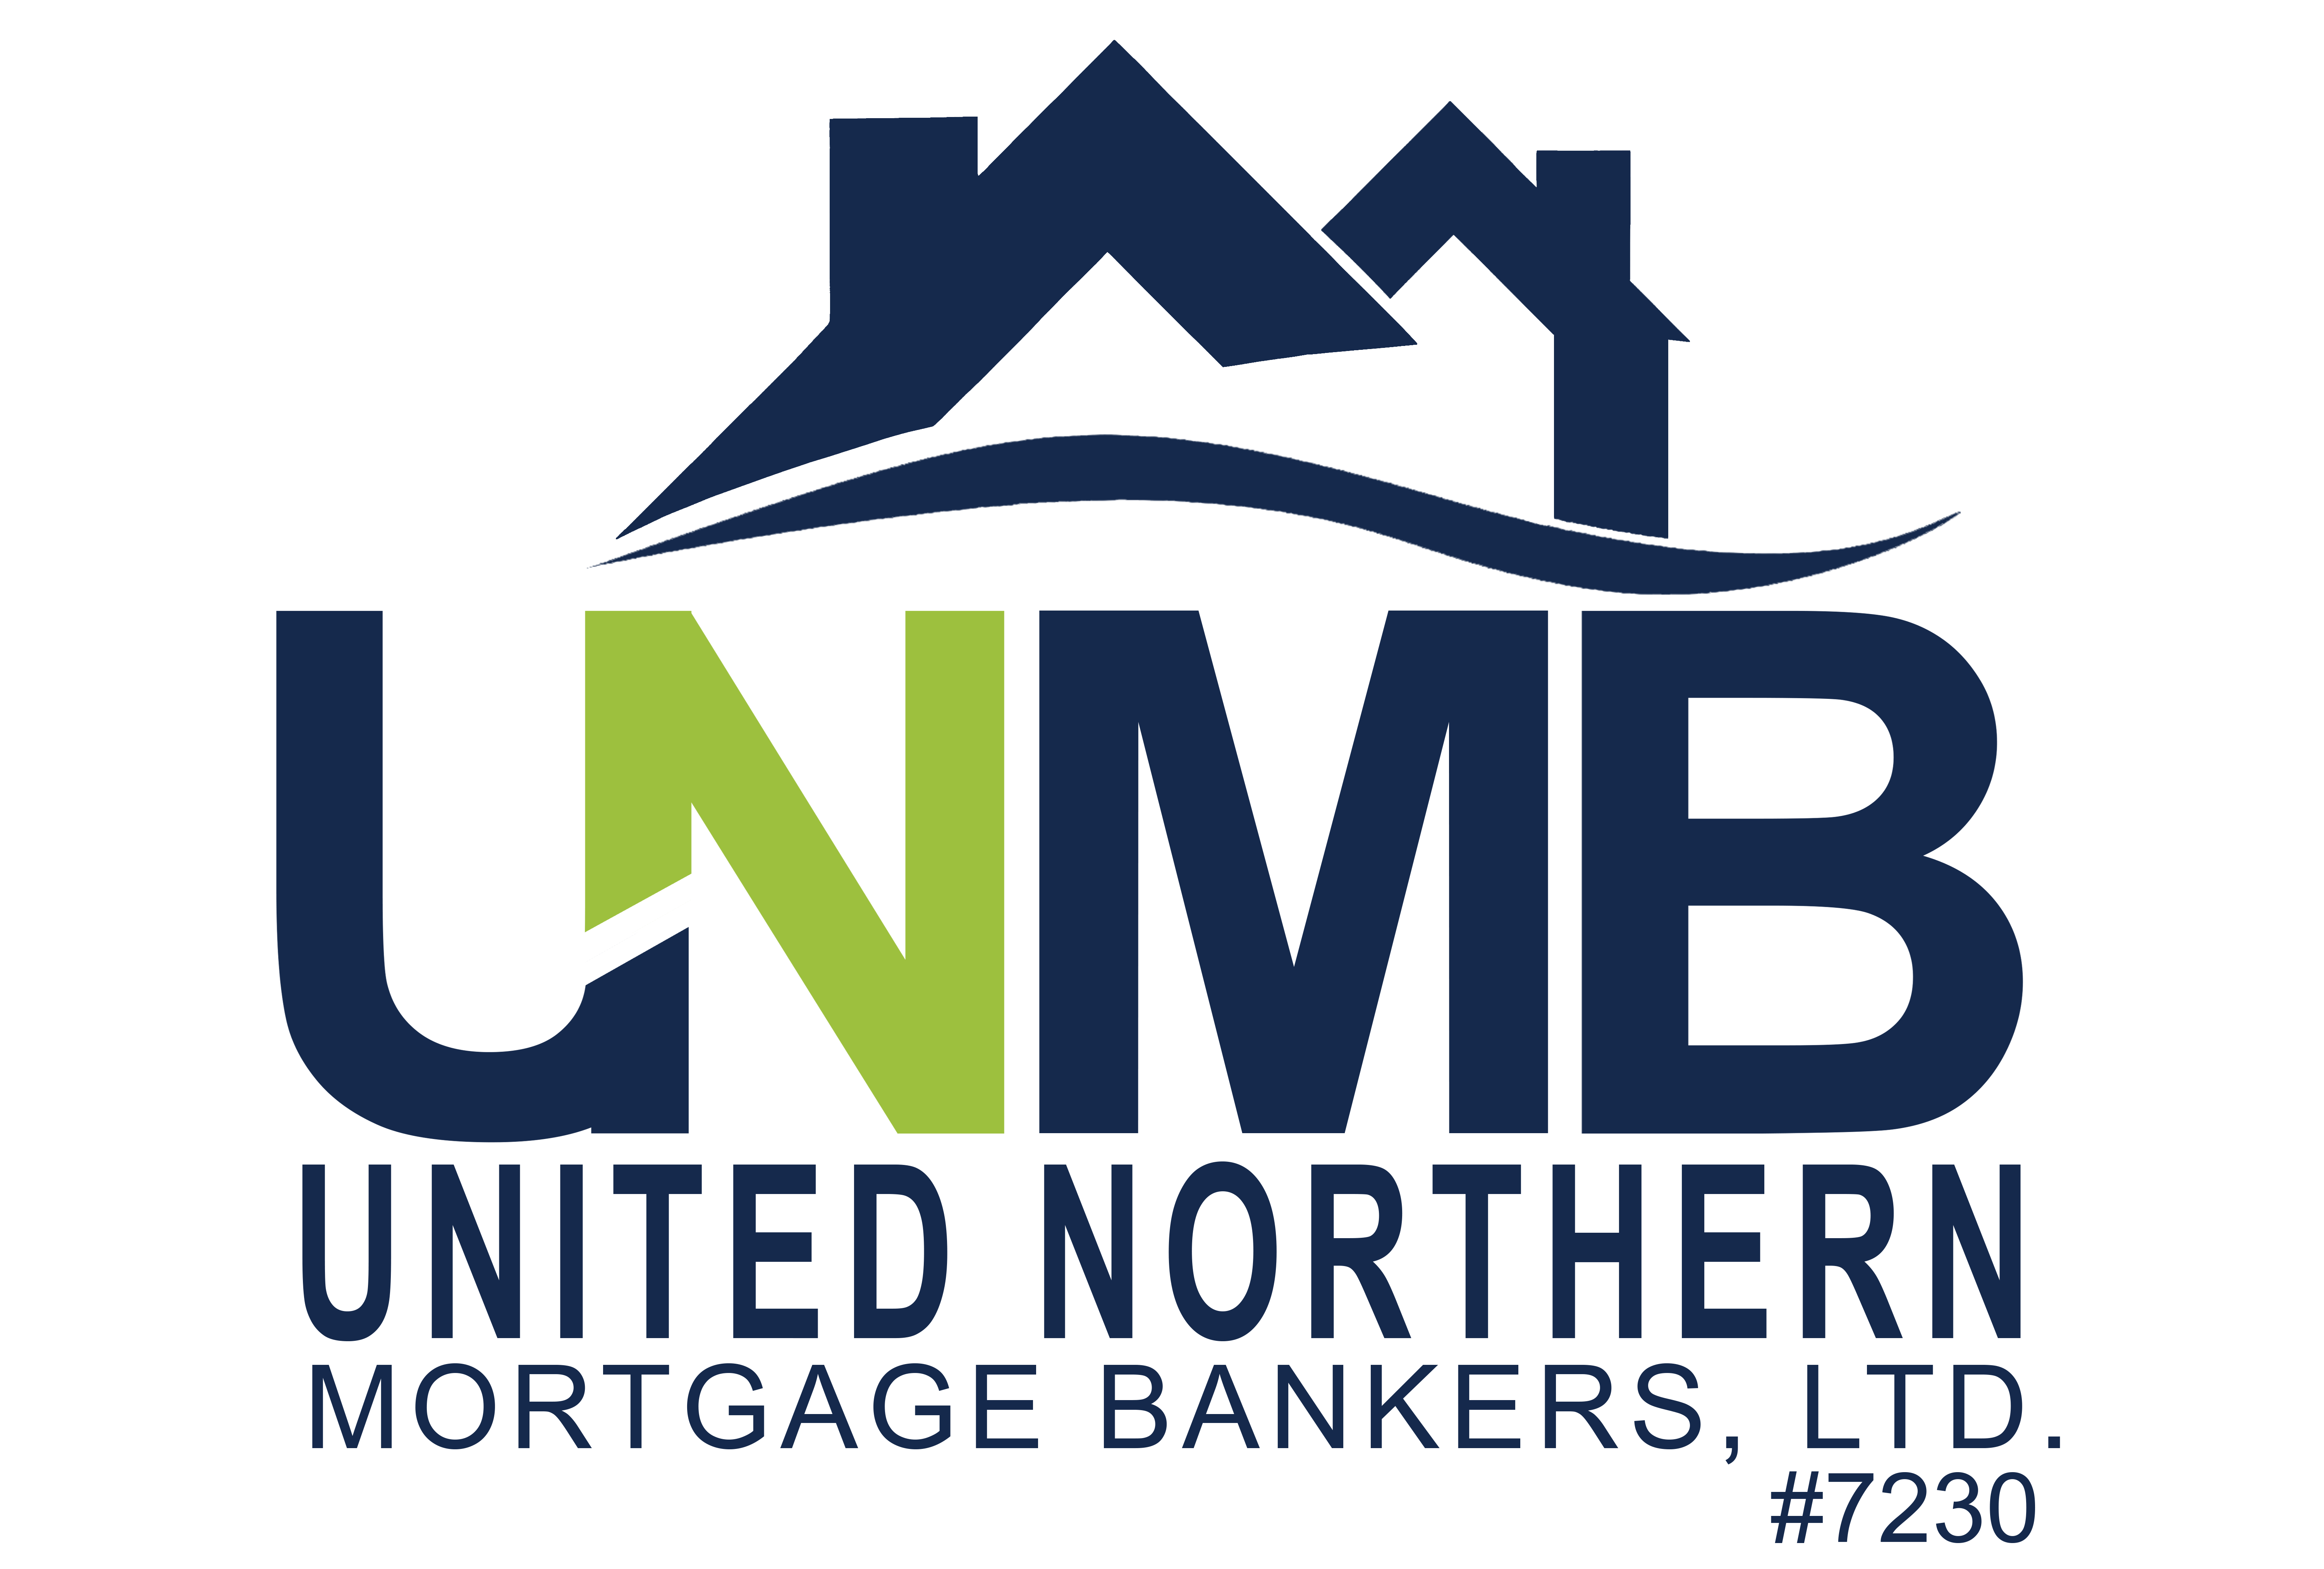 United Northern Mortgage Bankers Limited logo